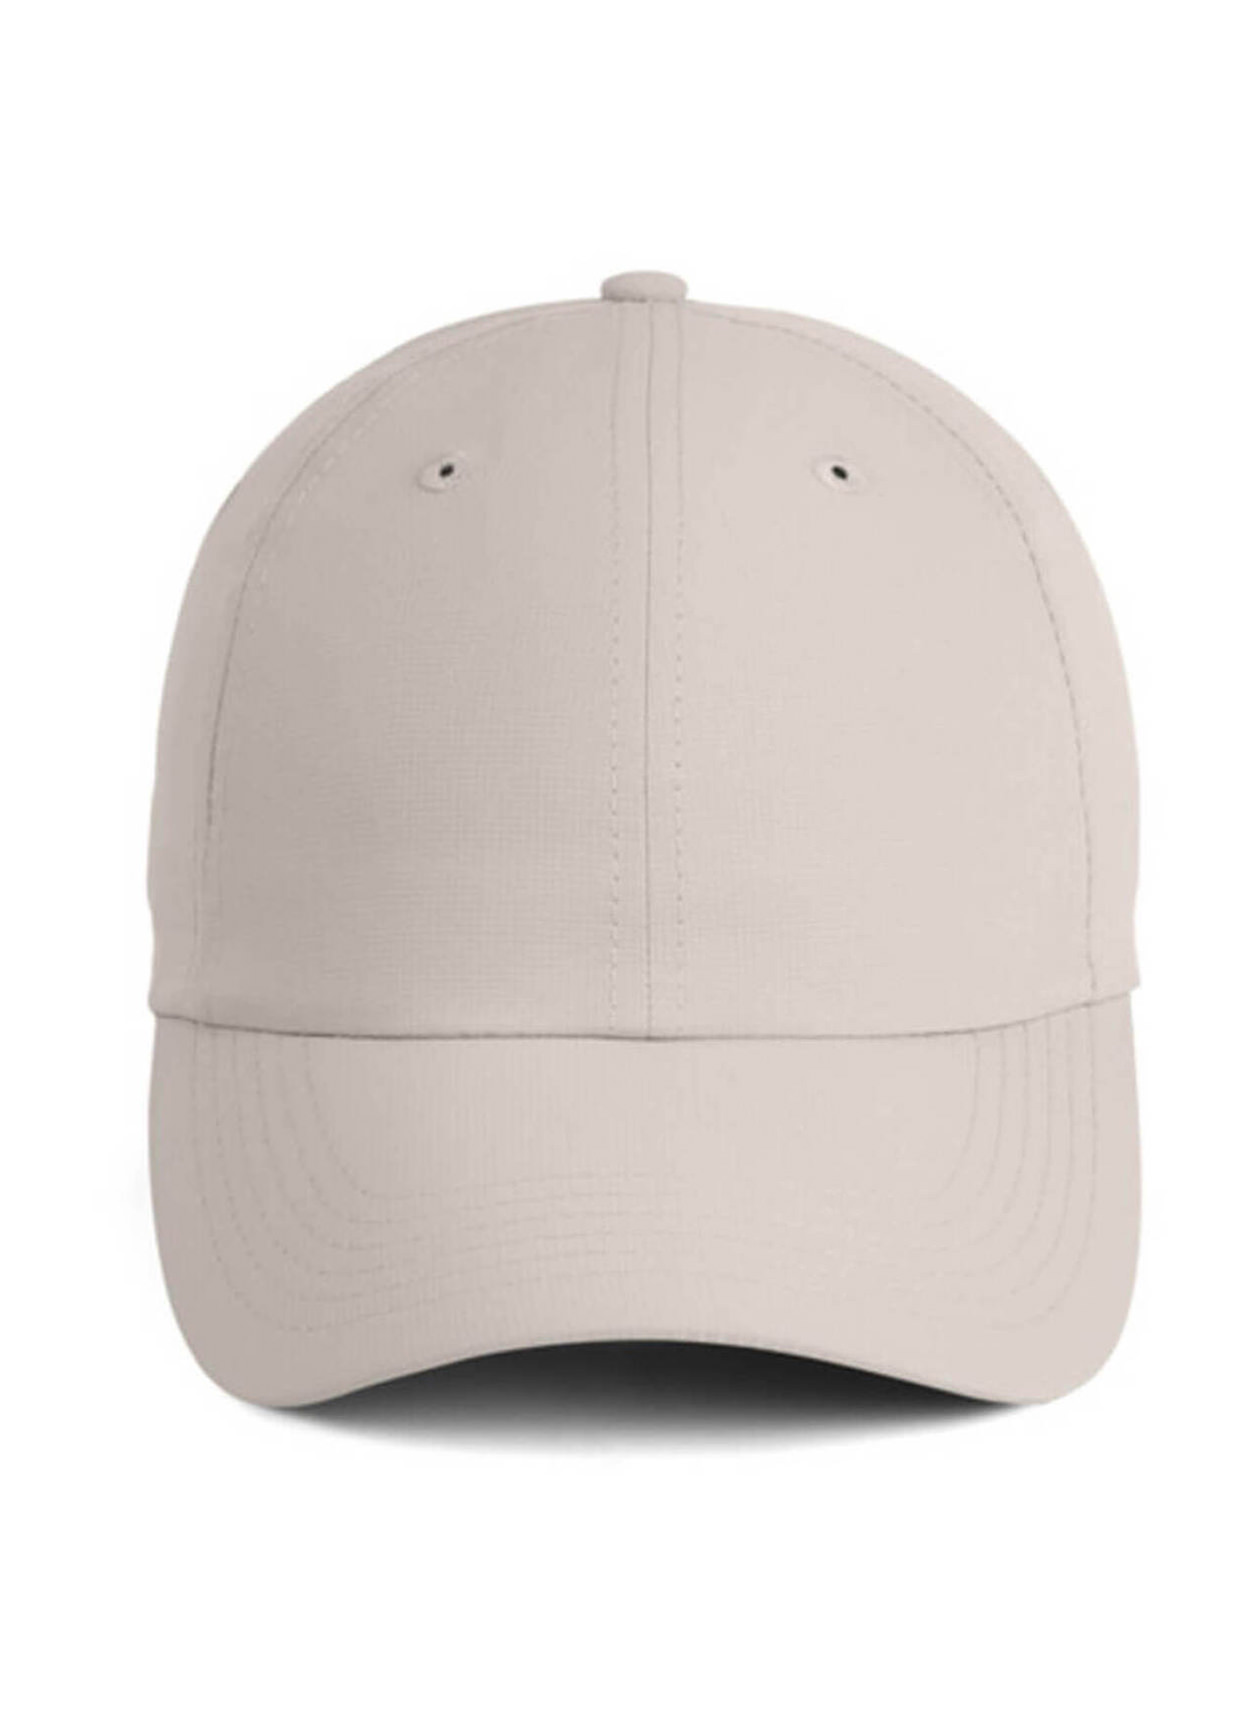 Imperial Putty Original Performance Hat